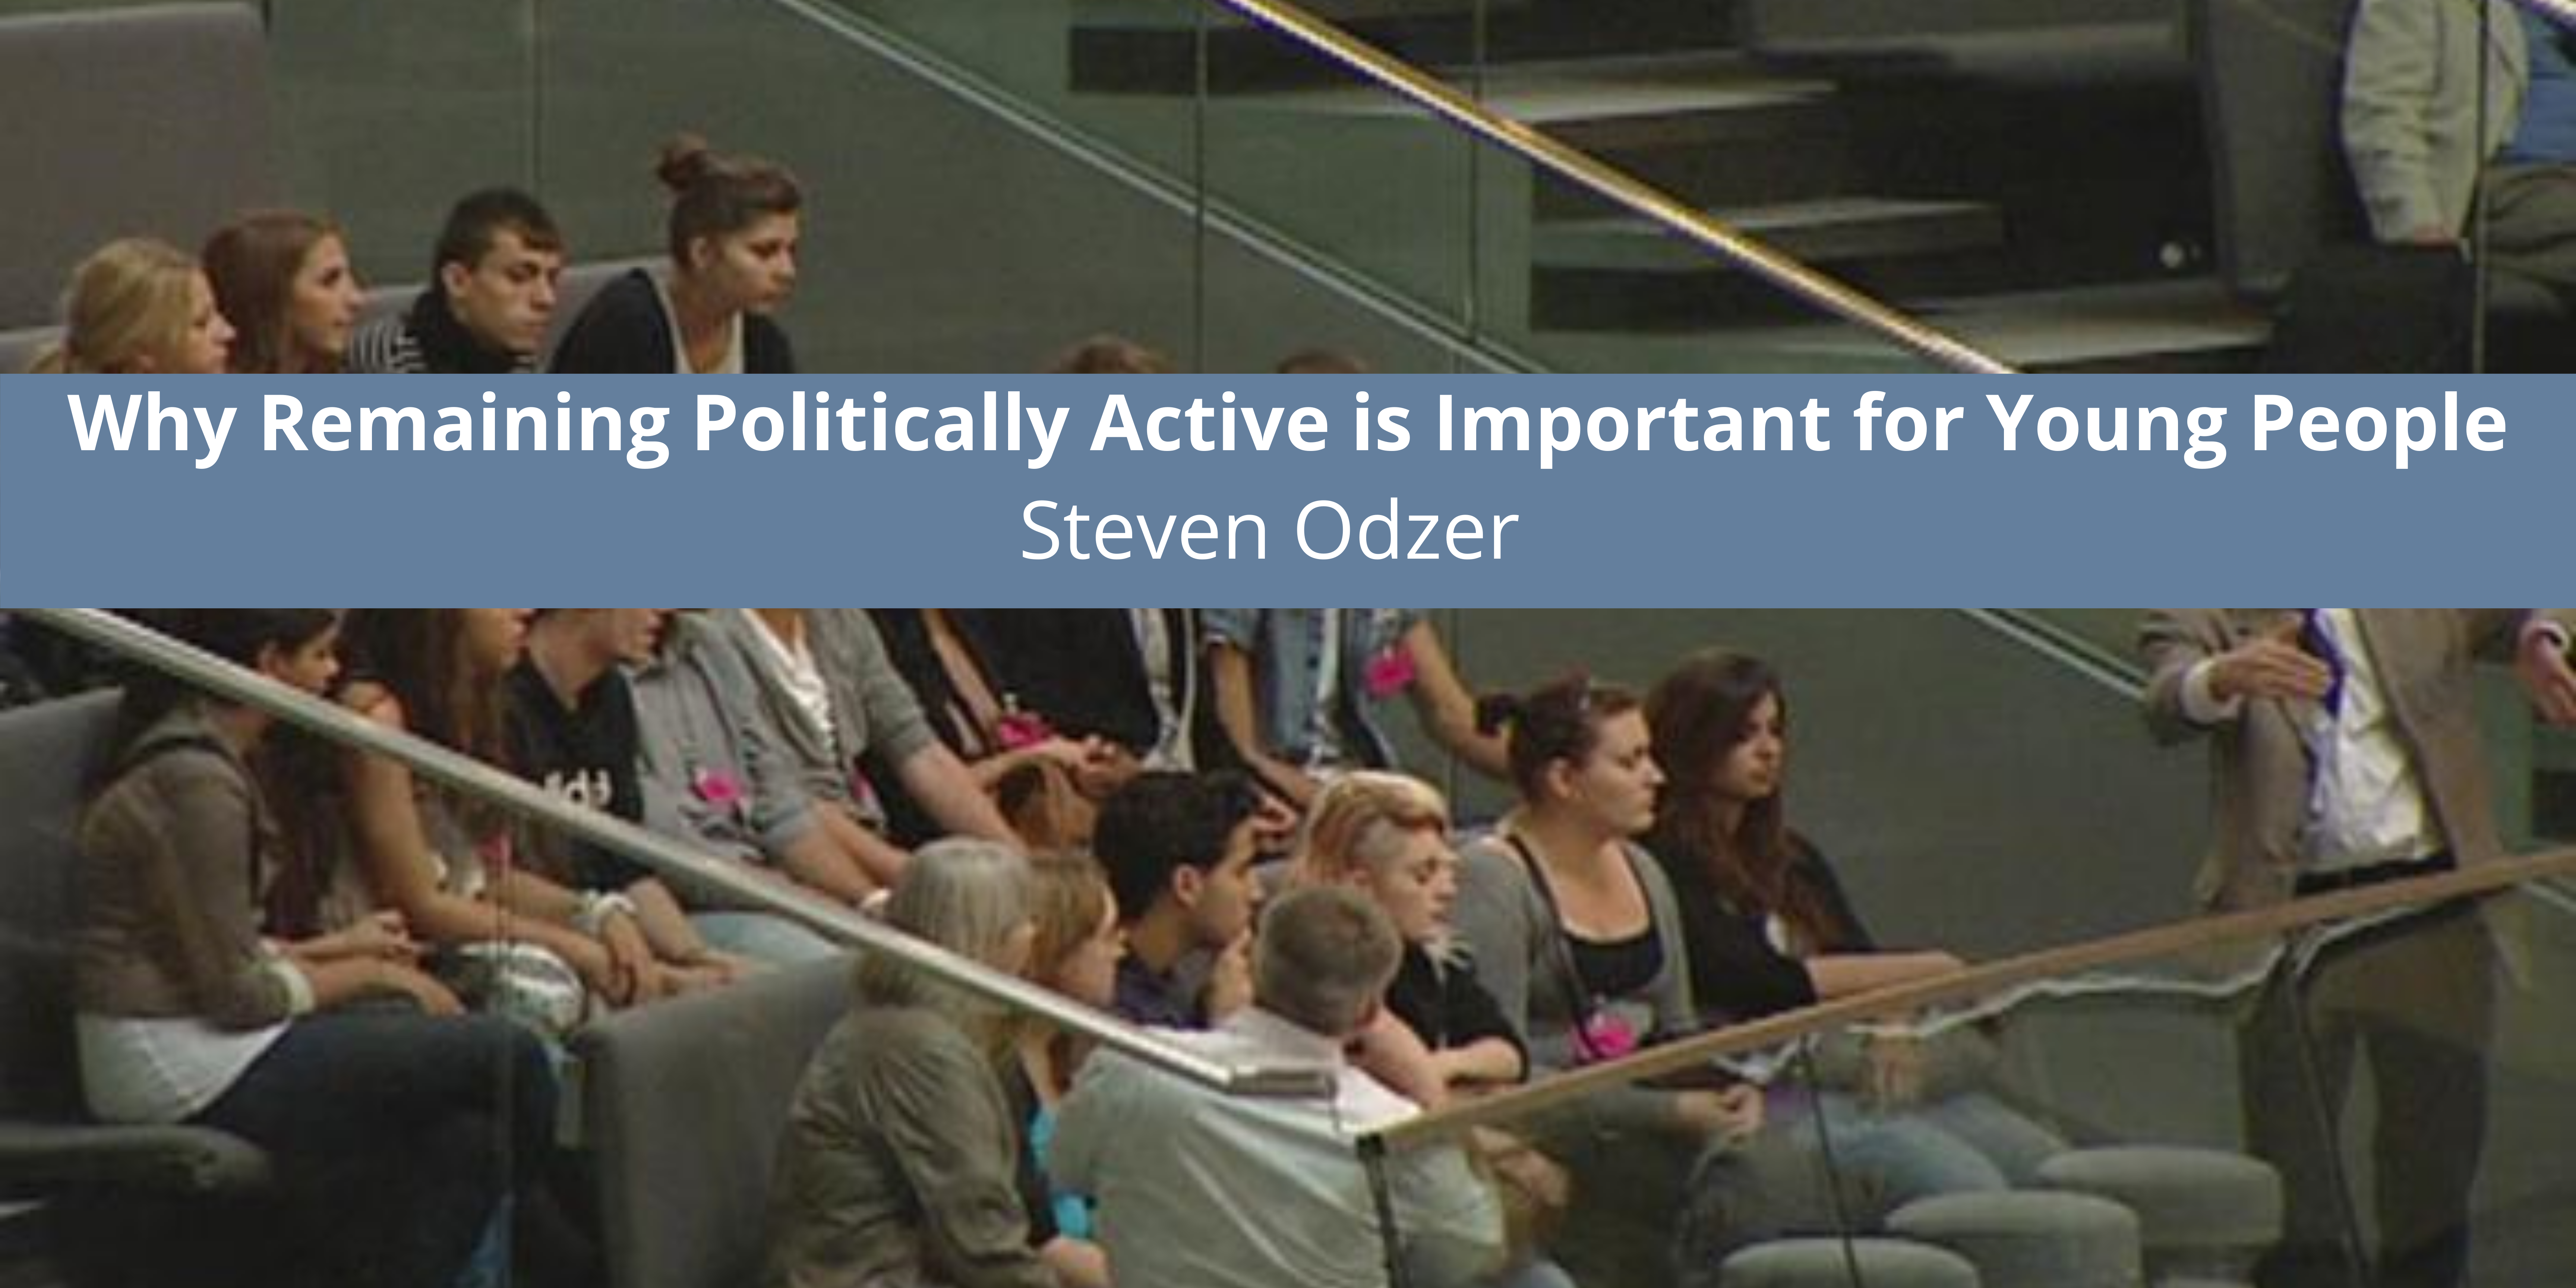 Steven Odzer Explains Why Remaining Politically Active is Important for Young People